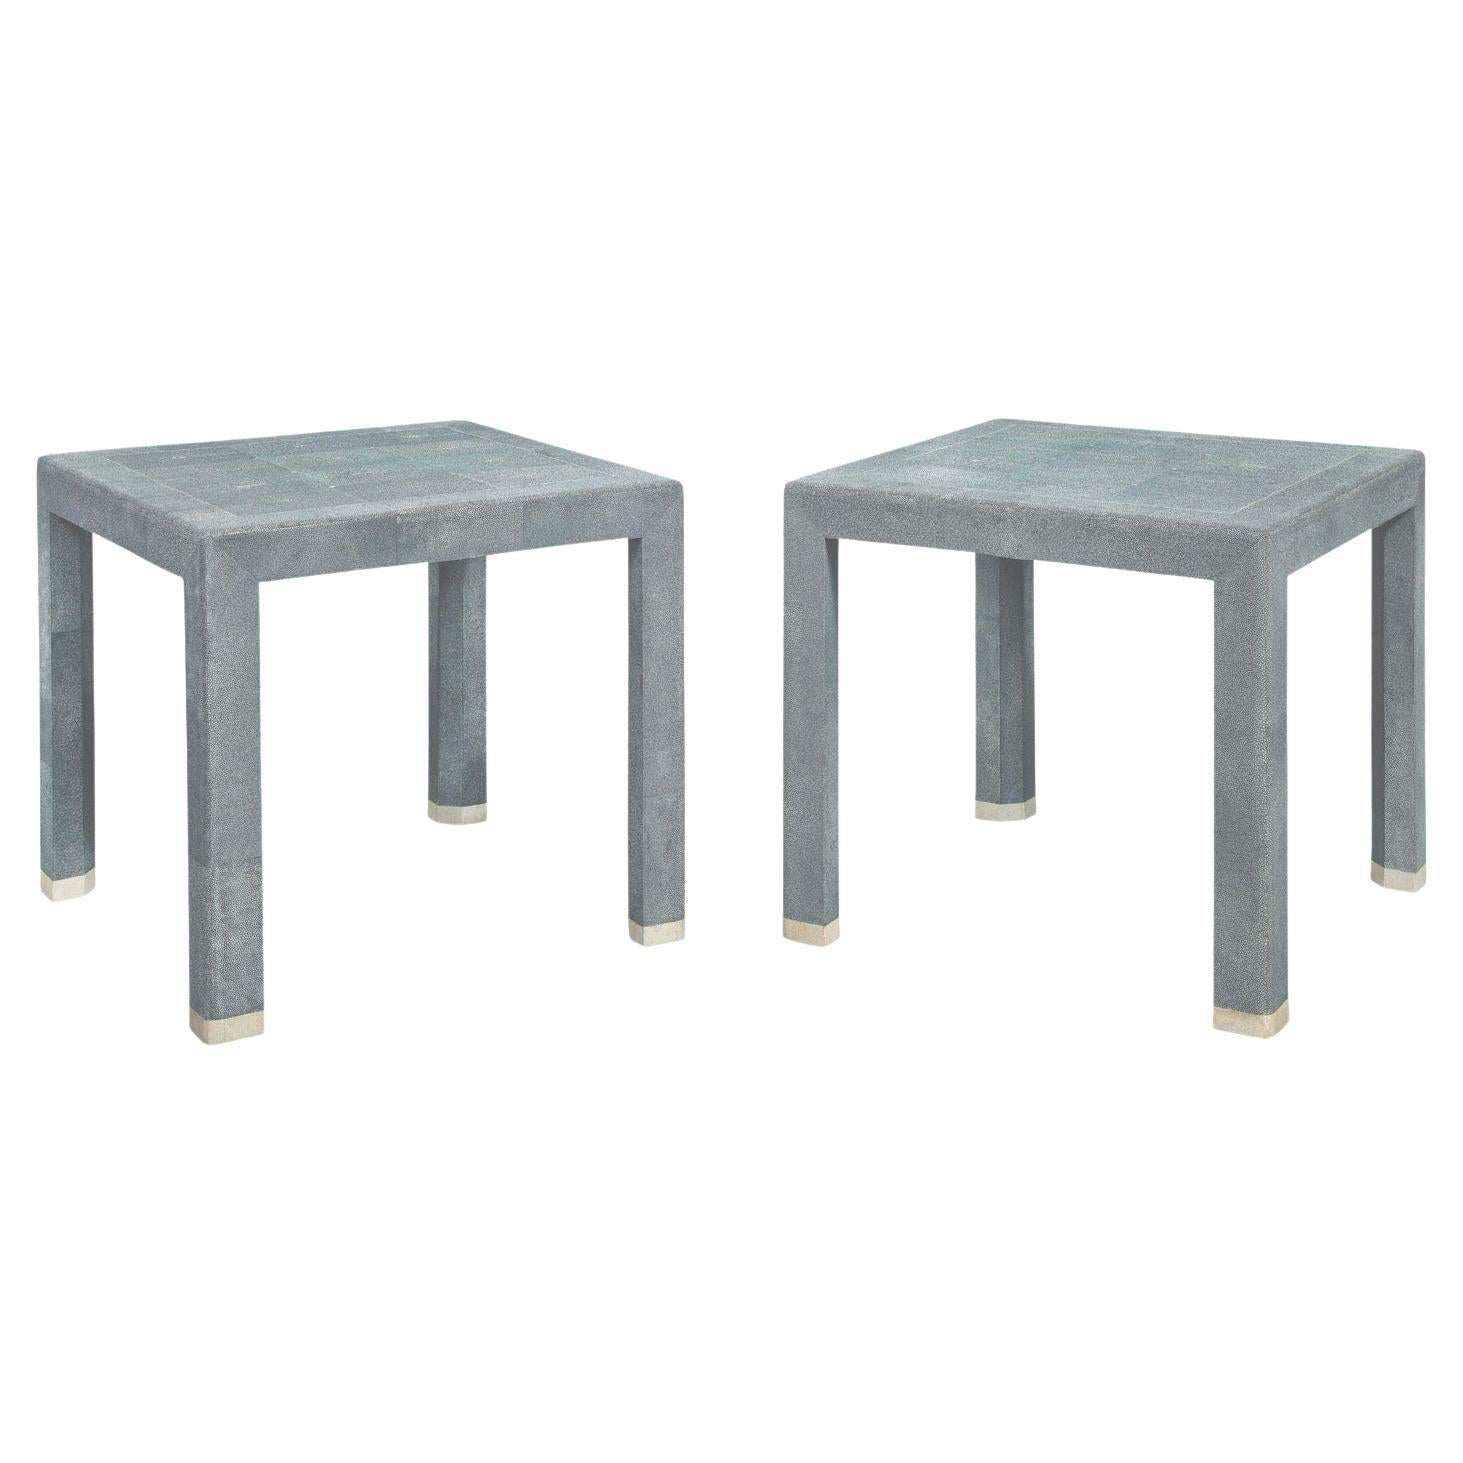 Karl Springer End Tables in Shagreen with Bone Inlays 1980s 'Signed'